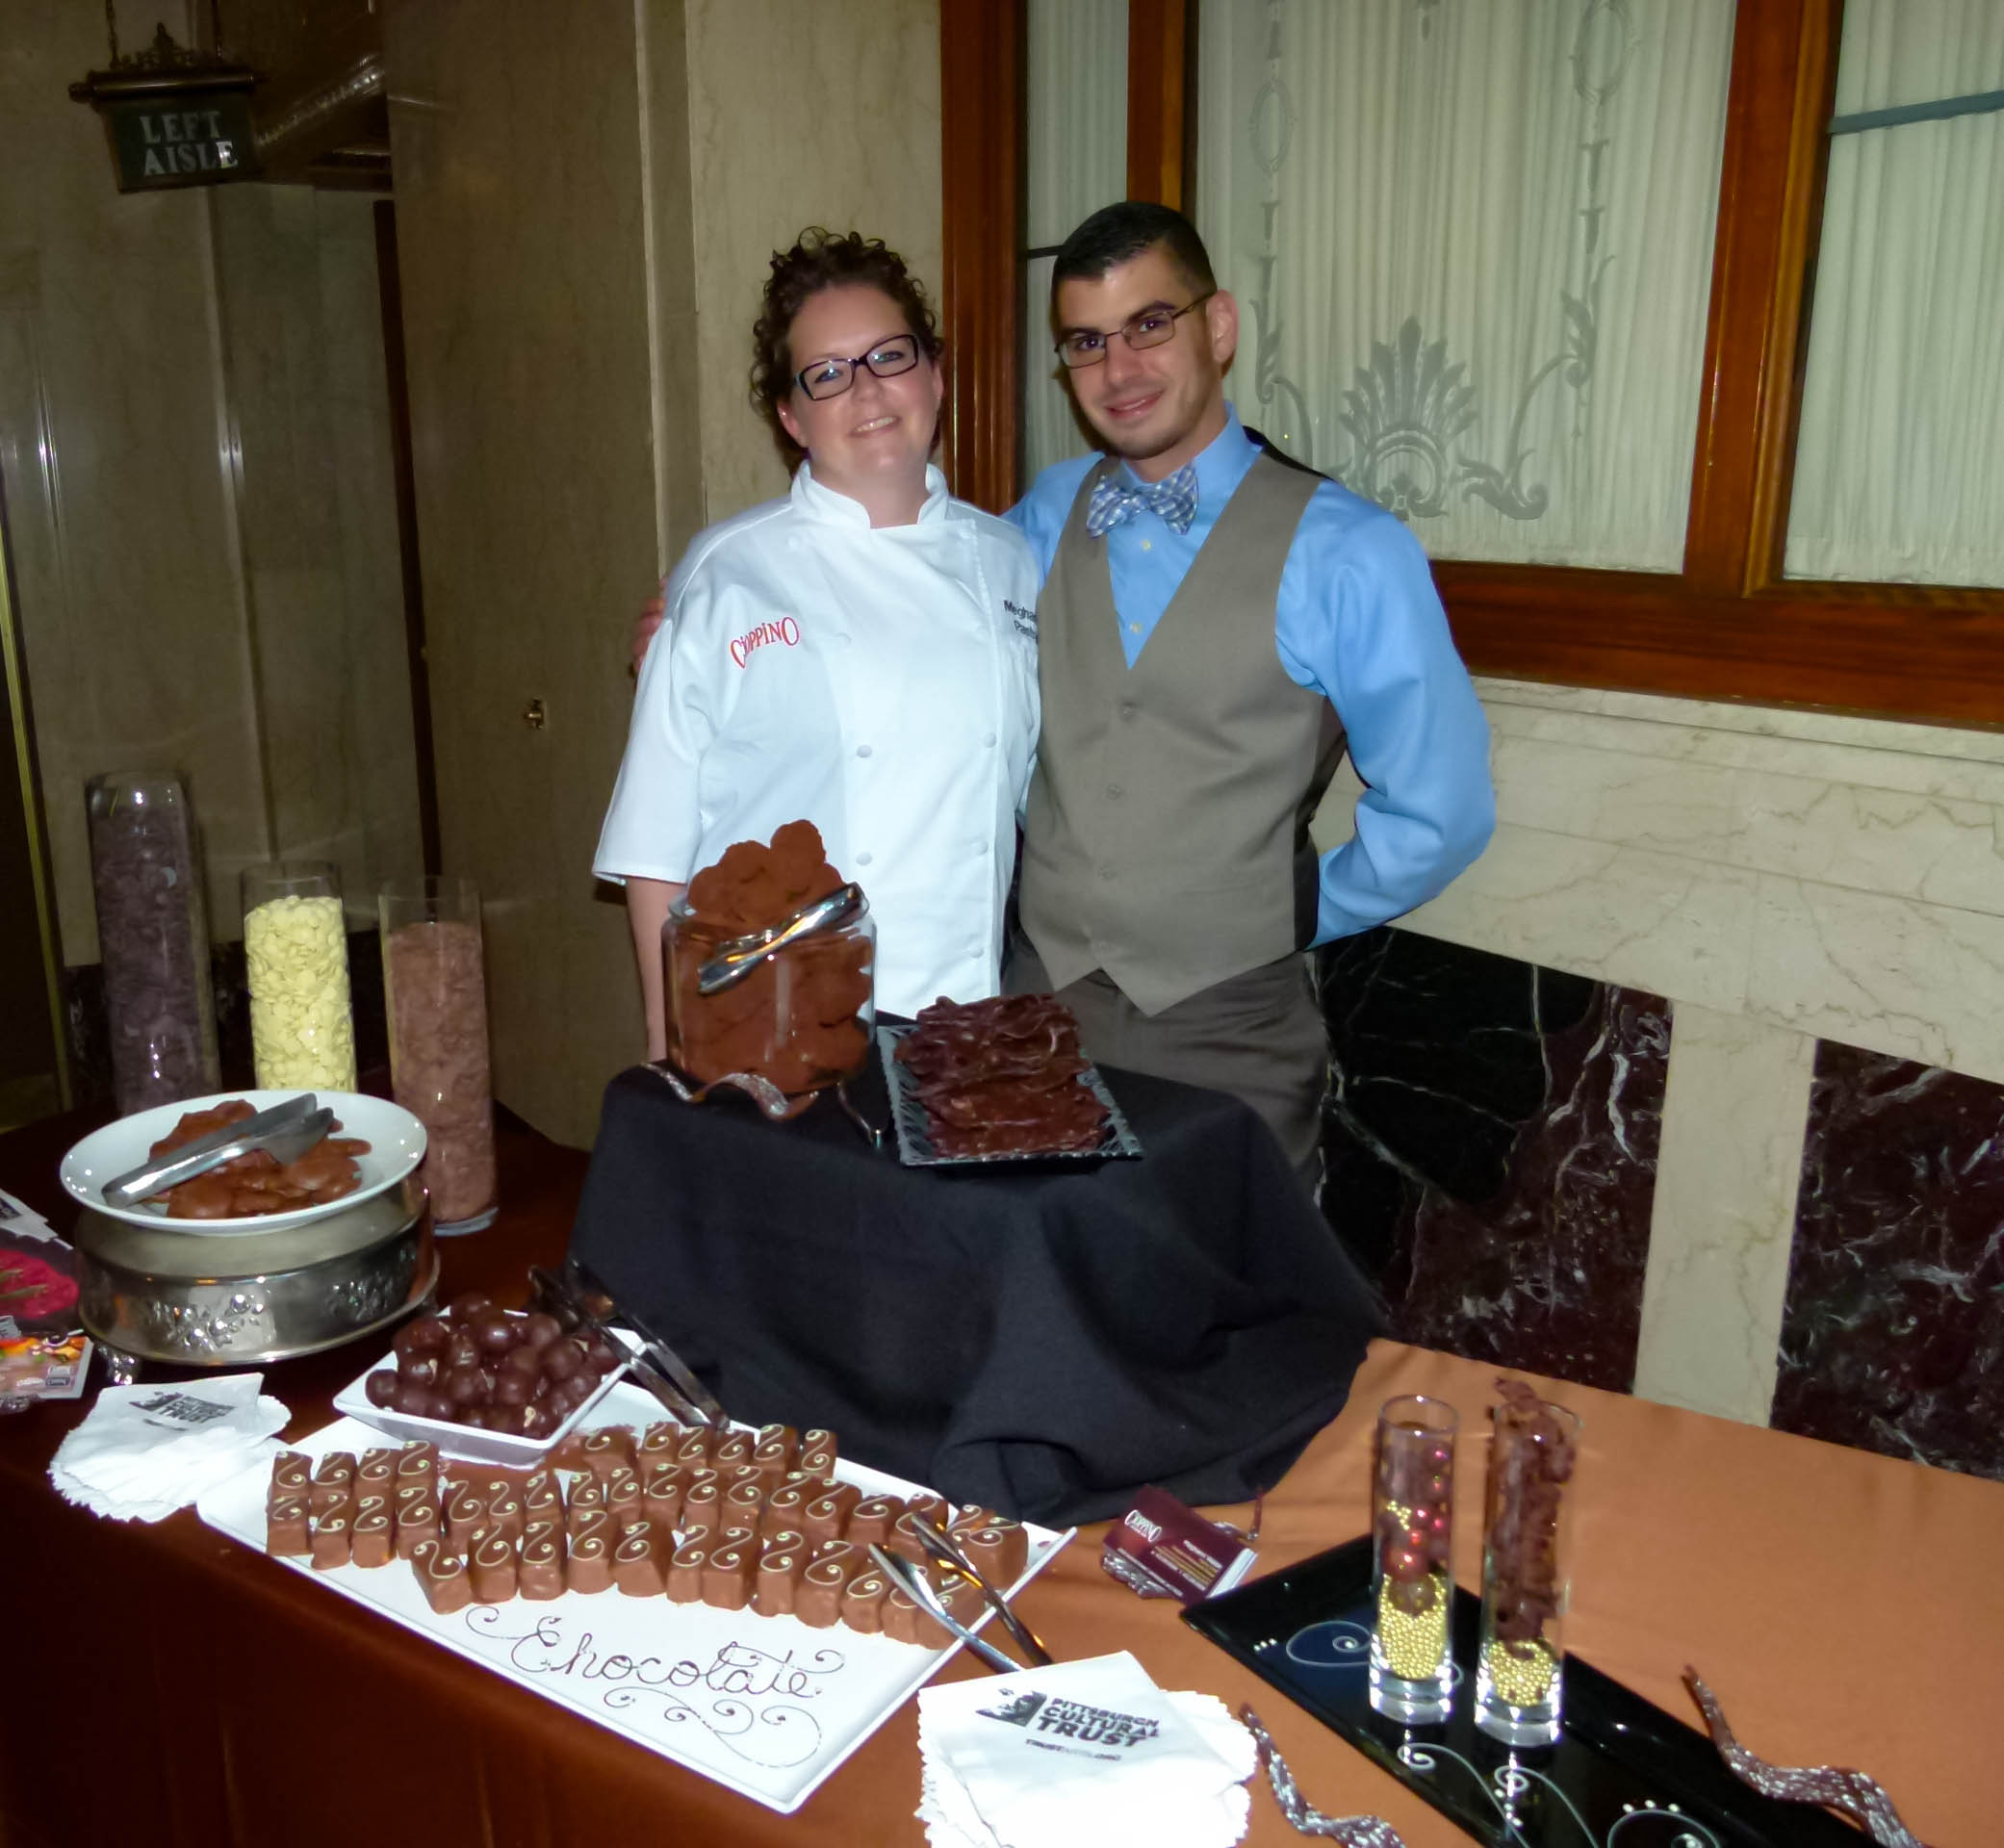 Cioppino was well represented by pastry chef Meghann Walsh and asst. GM Dominick Mastrogiacoma, who served Dark Chocolate Truffles, Chocolate Covered Bacon, Chocolate Bourbon Pecan Balls, Chocolate Turtles, and Chocolate Marshmallow.